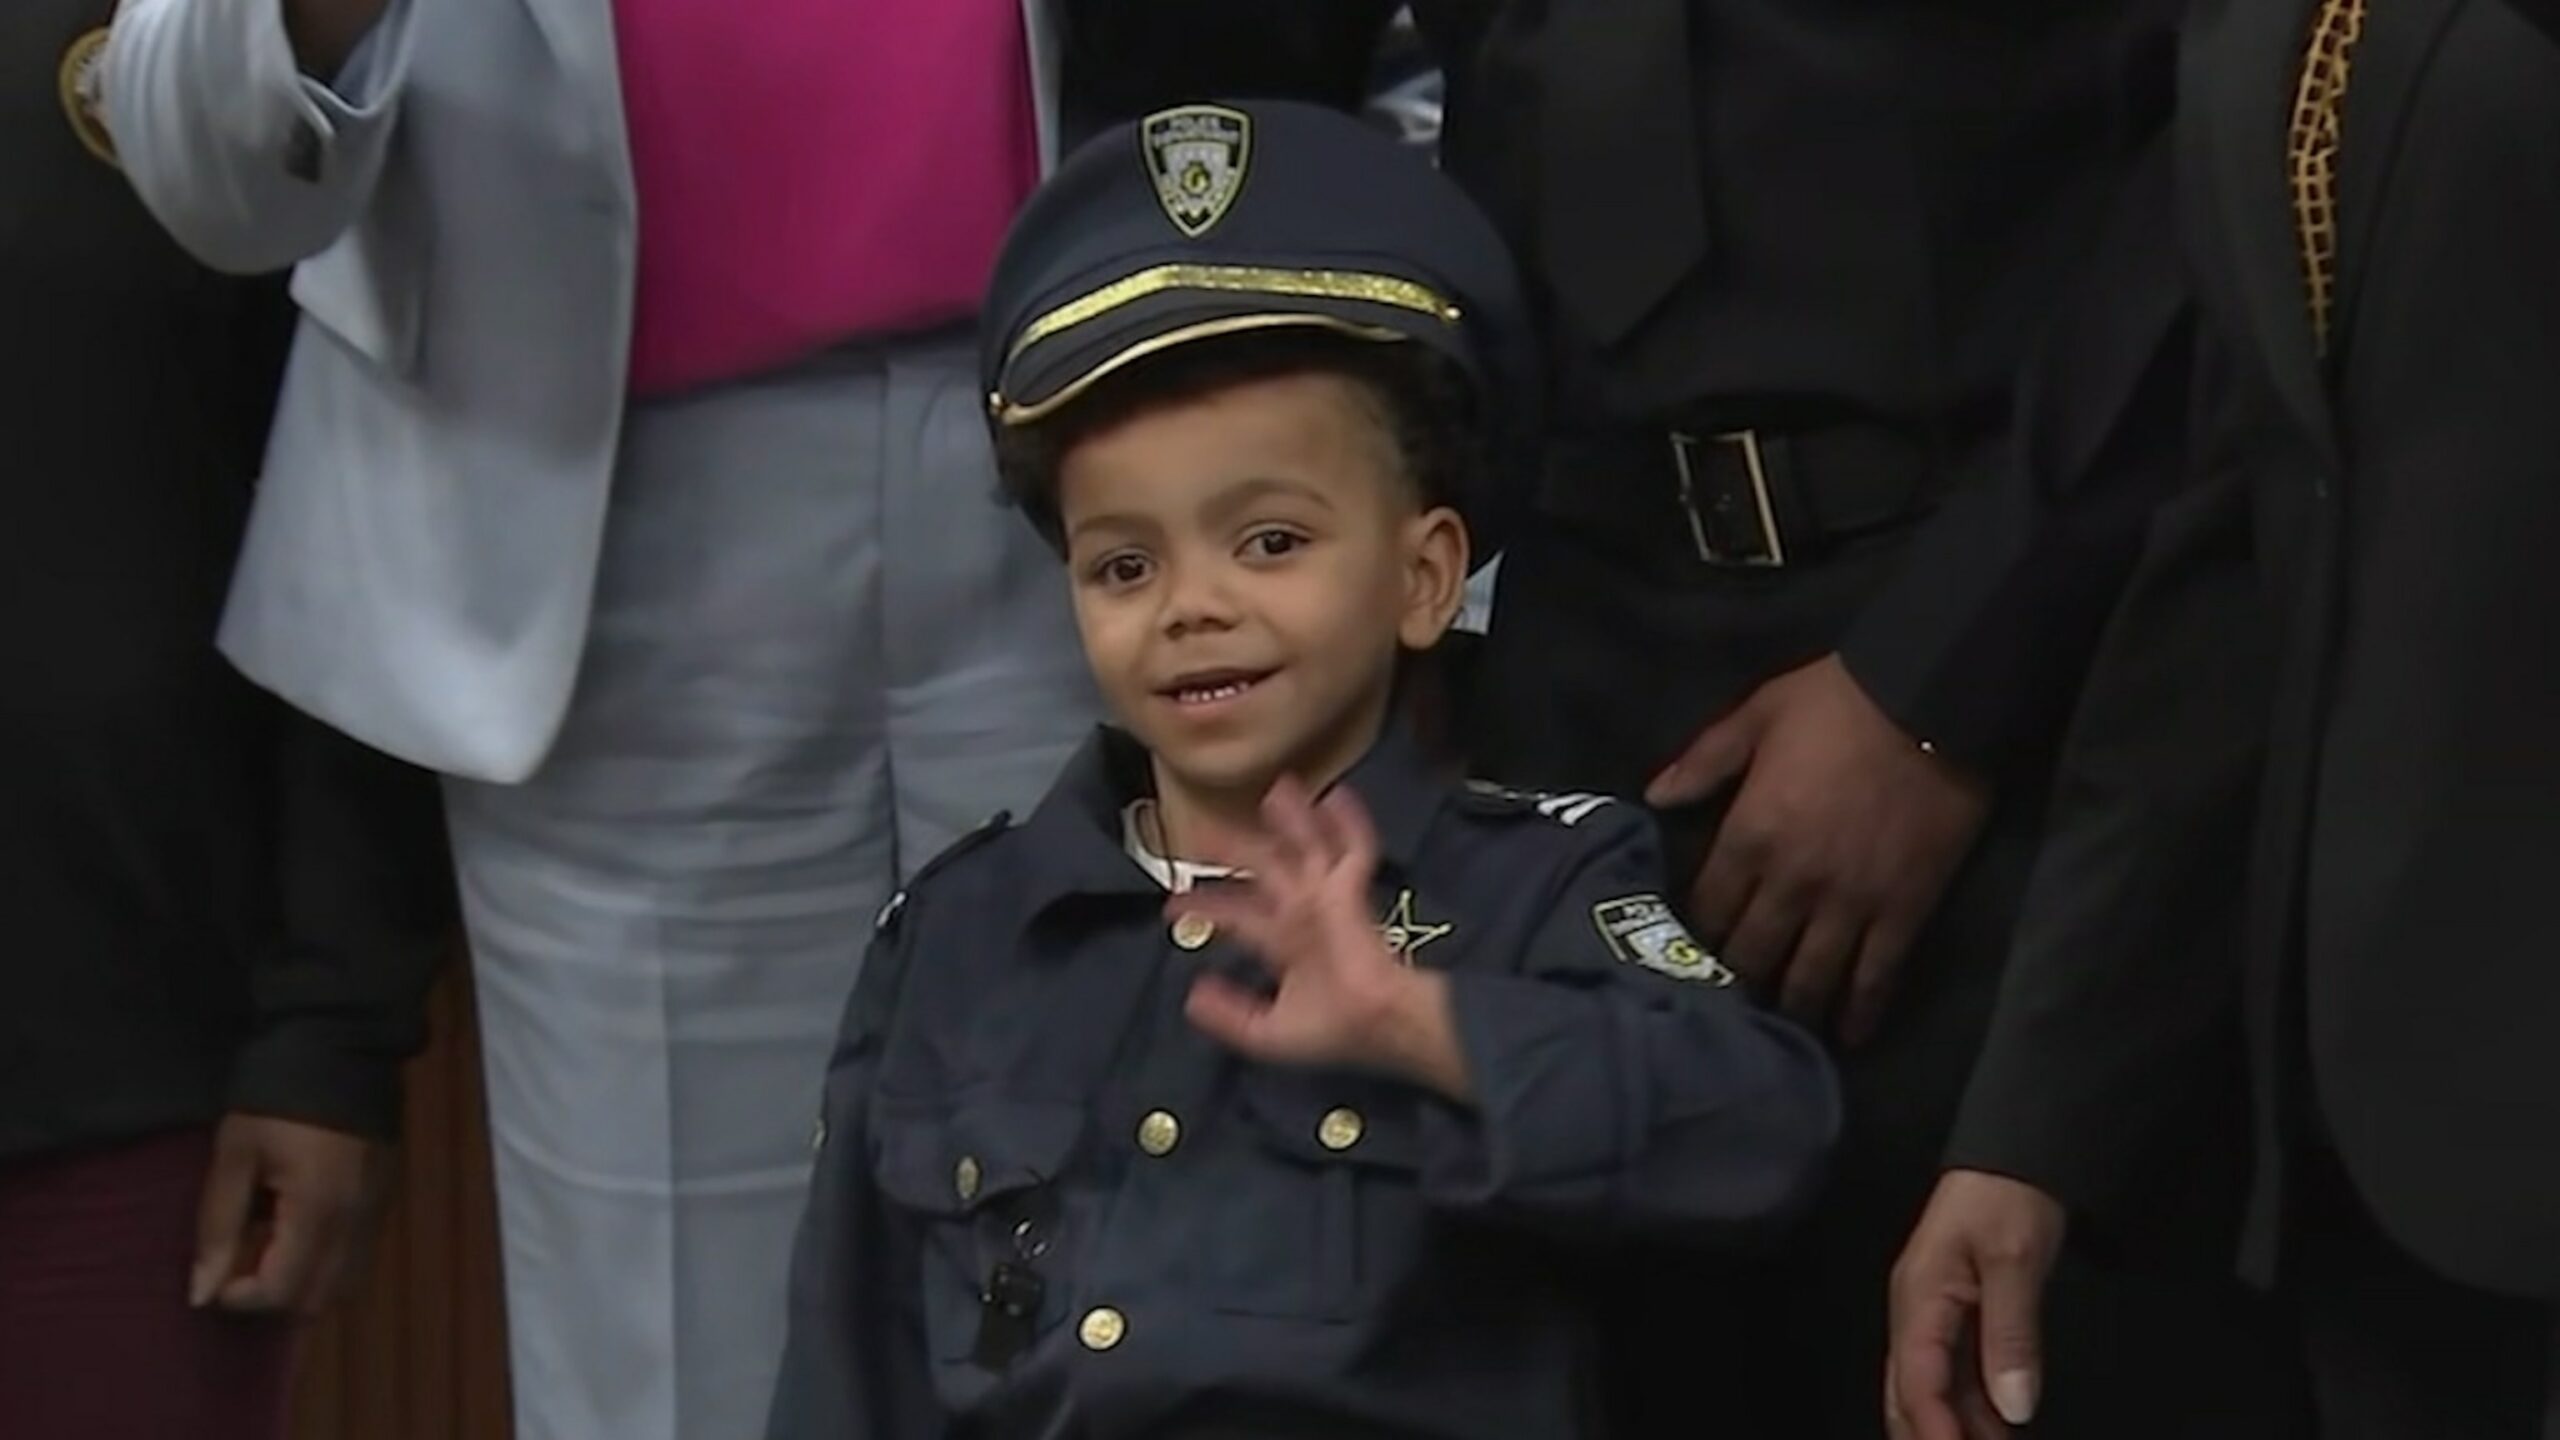 Young Boy Honored as Sergeant by Illinois Army National Guard for His Courage Battling Cancer